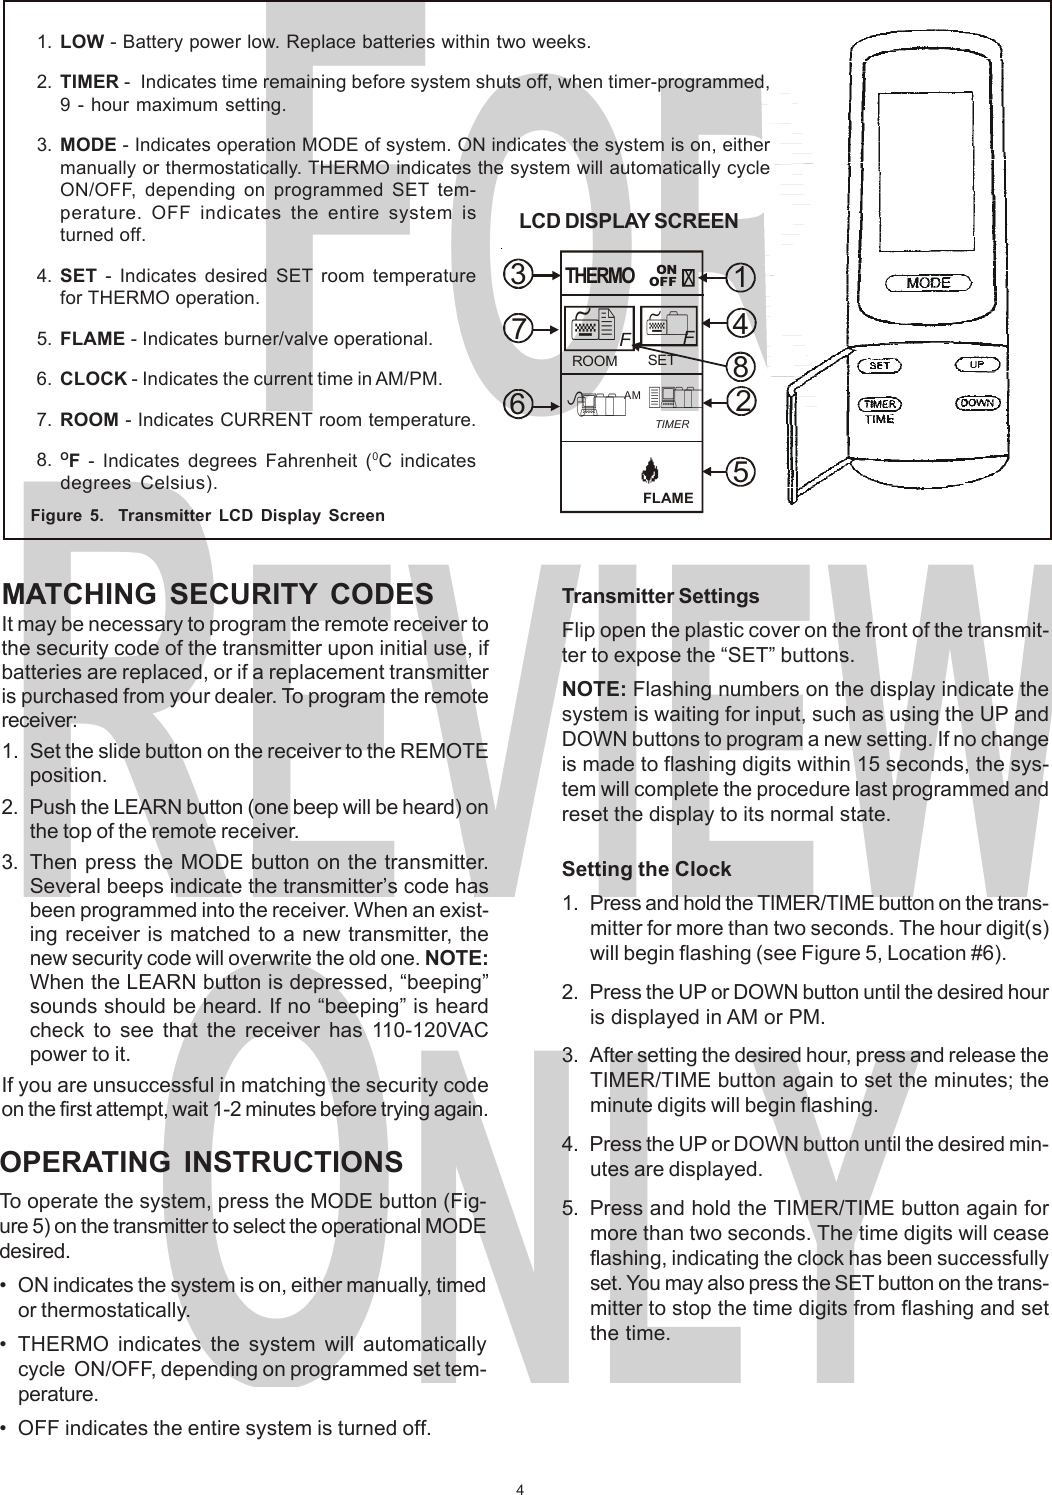 4FORREVIEWONLYMATCHING SECURITY CODESIt may be necessary to program the remote receiver tothe security code of the transmitter upon initial use, ifbatteries are replaced, or if a replacement transmitteris purchased from your dealer. To program the remotereceiver:1. Set the slide button on the receiver to the REMOTEposition.2. Push the LEARN button (one beep will be heard) onthe top of the remote receiver.3. Then press the MODE button on the transmitter.Several beeps indicate the transmitter’s code hasbeen programmed into the receiver. When an exist-ing receiver is matched to a new transmitter, thenew security code will overwrite the old one. NOTE:When the LEARN button is depressed, “beeping”sounds should be heard. If no “beeping” is heardcheck to see that the receiver has 110-120VACpower to it.If you are unsuccessful in matching the security codeon the first attempt, wait 1-2 minutes before trying again.Figure 5.  Transmitter LCD Display Screen1. LOW - Battery power low. Replace batteries within two weeks.2. TIMER -  Indicates time remaining before system shuts off, when timer-programmed,9 - hour maximum setting.3. MODE - Indicates operation MODE of system. ON indicates the system is on, eithermanually or thermostatically. THERMO indicates the system will automatically cycleON/OFF, depending on programmed SET tem-perature. OFF indicates the entire system isturned off.4. SET - Indicates desired SET room temperaturefor THERMO operation.5. FLAME - Indicates burner/valve operational.6. CLOCK - Indicates the current time in AM/PM.7. ROOM - Indicates CURRENT room temperature.8. OF - Indicates degrees Fahrenheit (0C indicatesdegrees Celsius).Transmitter SettingsFlip open the plastic cover on the front of the transmit-ter to expose the “SET” buttons.NOTE: Flashing numbers on the display indicate thesystem is waiting for input, such as using the UP andDOWN buttons to program a new setting. If no changeis made to flashing digits within 15 seconds, the sys-tem will complete the procedure last programmed andreset the display to its normal state.Setting the Clock1. Press and hold the TIMER/TIME button on the trans-mitter for more than two seconds. The hour digit(s)will begin flashing (see Figure 5, Location #6).2. Press the UP or DOWN button until the desired houris displayed in AM or PM.3. After setting the desired hour, press and release theTIMER/TIME button again to set the minutes; theminute digits will begin flashing.4. Press the UP or DOWN button until the desired min-utes are displayed.5. Press and hold the TIMER/TIME button again formore than two seconds. The time digits will ceaseflashing, indicating the clock has been successfullyset. You may also press the SET button on the trans-mitter to stop the time digits from flashing and setthe time.OPERATING INSTRUCTIONSTo operate the system, press the MODE button (Fig-ure 5) on the transmitter to select the operational MODEdesired.• ON indicates the system is on, either manually, timedor thermostatically.• THERMO indicates the system will automaticallycycle  ON/OFF, depending on programmed set tem-perature.• OFF indicates the entire system is turned off.14825673 ONOFFFLAMETIMERAMROOM SETFFTHERMOLCD DISPLAY SCREEN